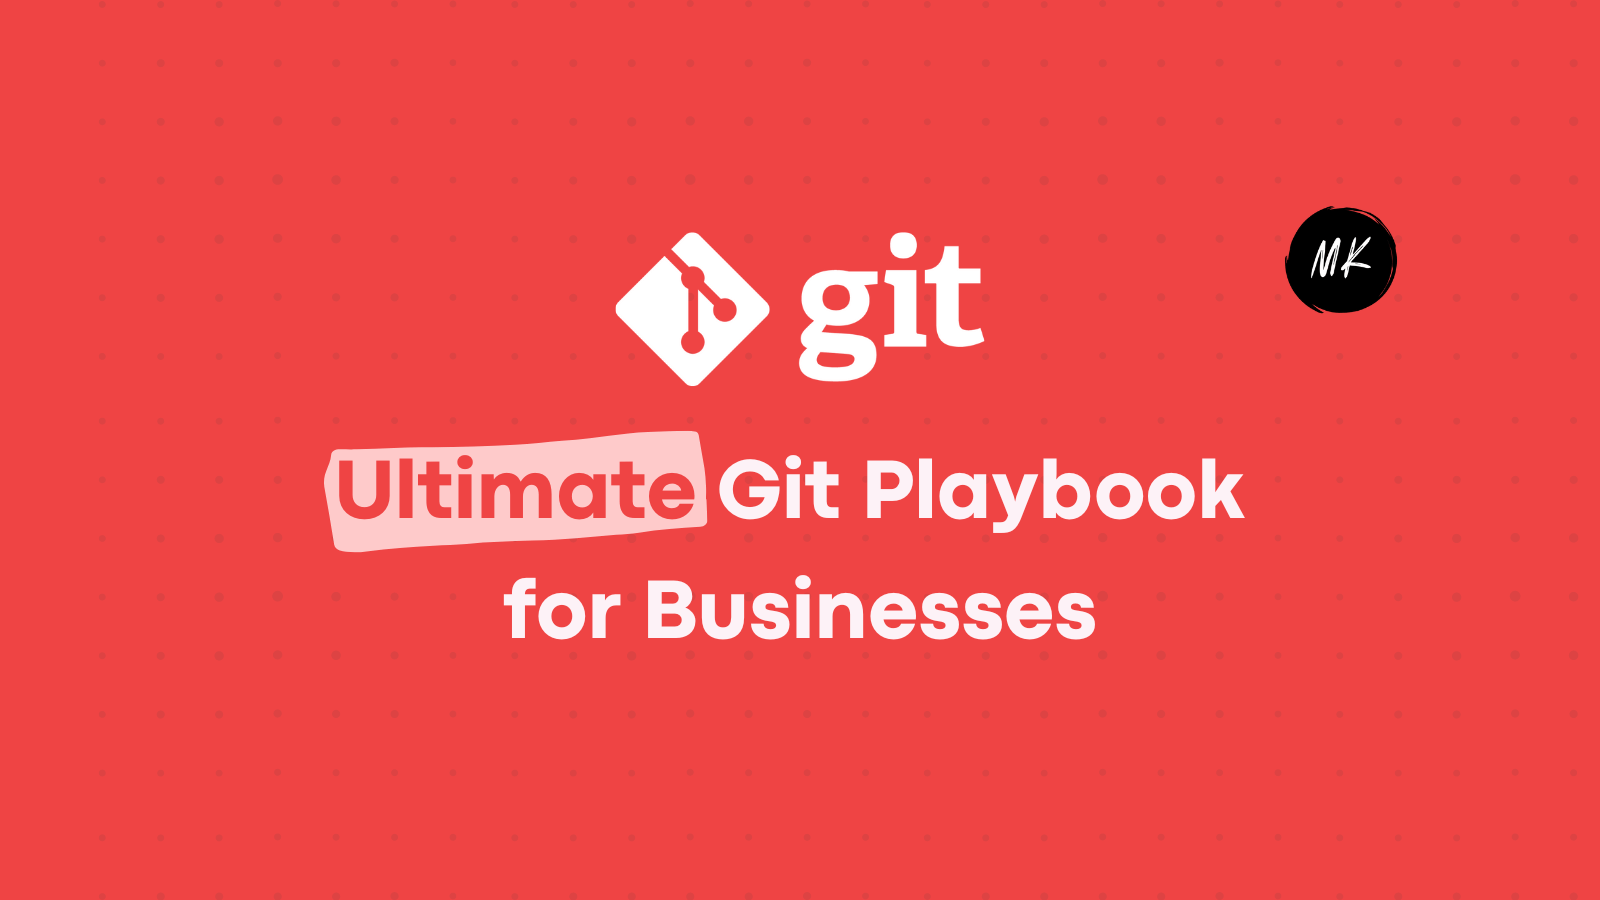 The Ultimate Git Playbook for Businesses